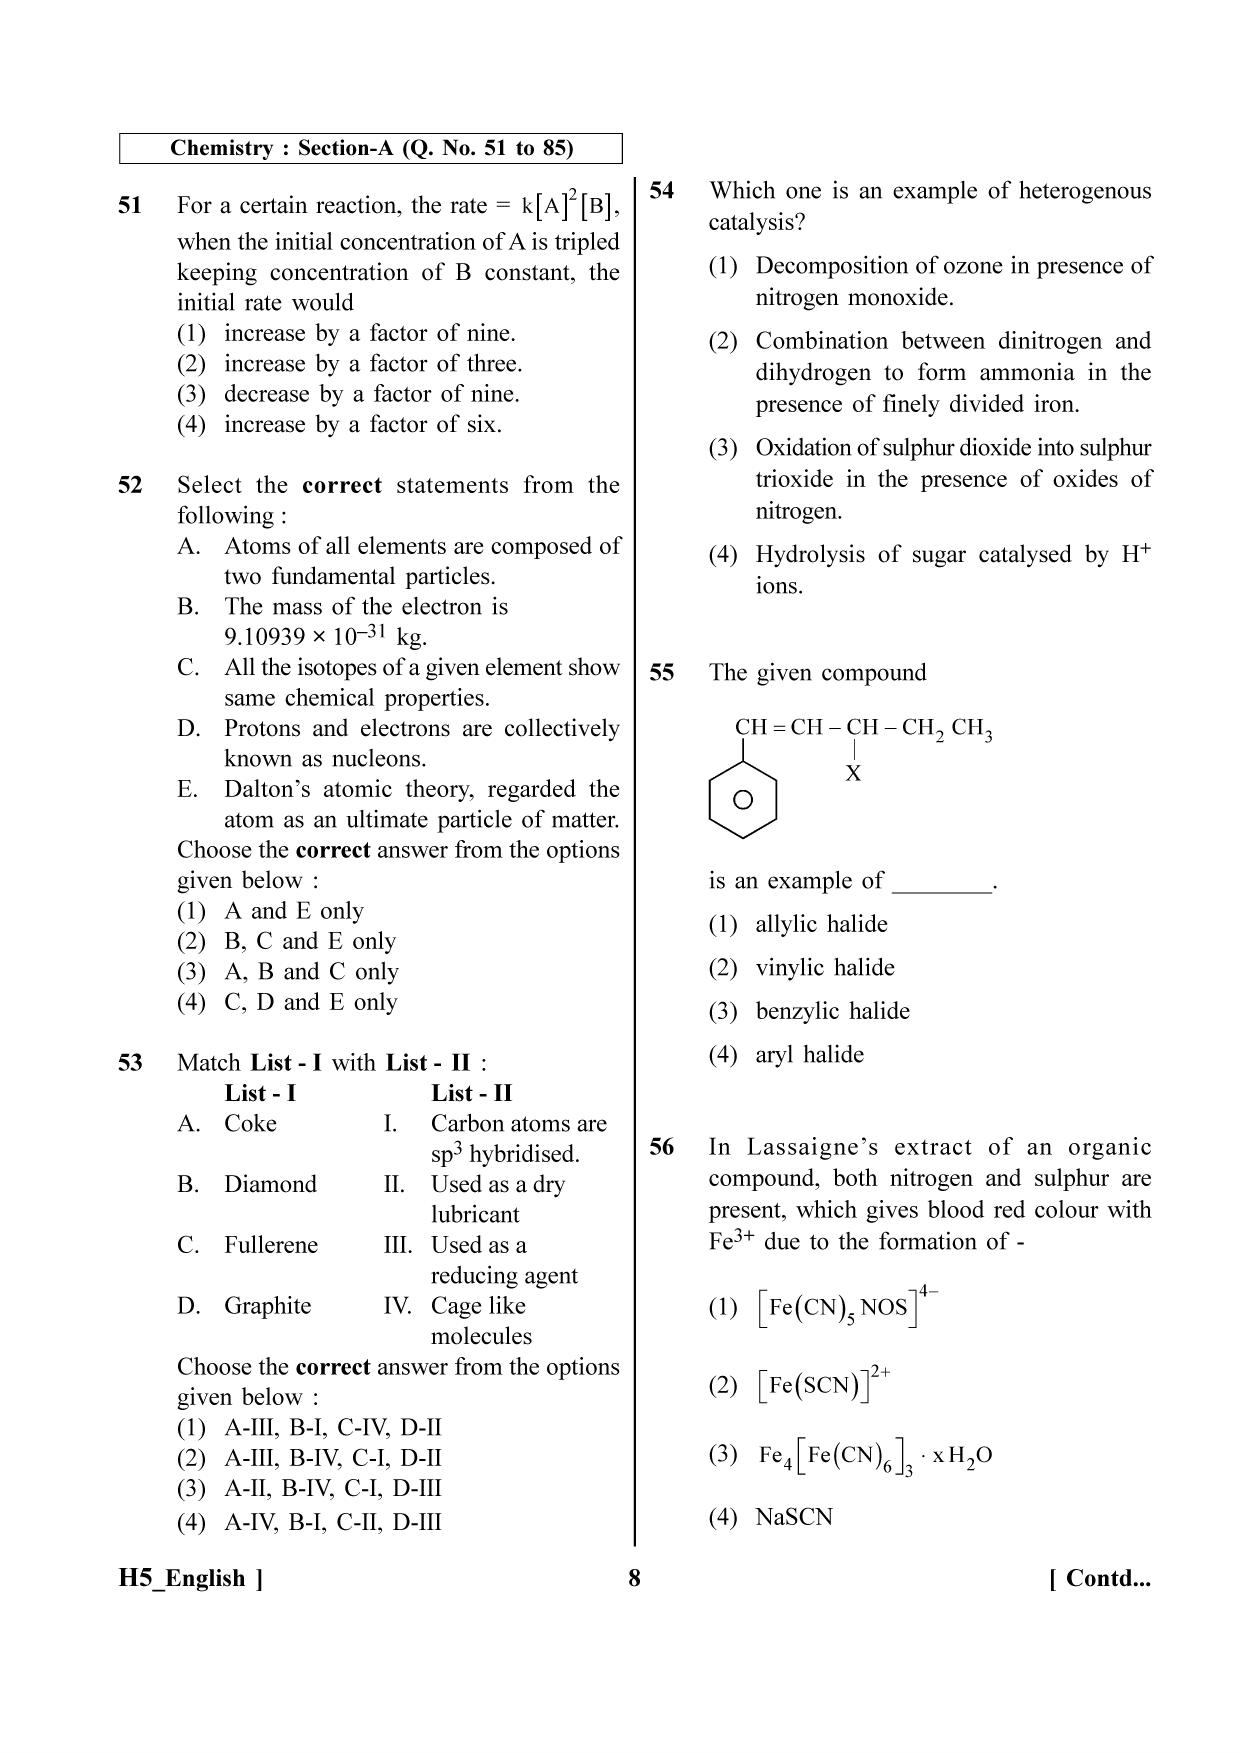 NEET 2023 H5 Question Paper - Page 8